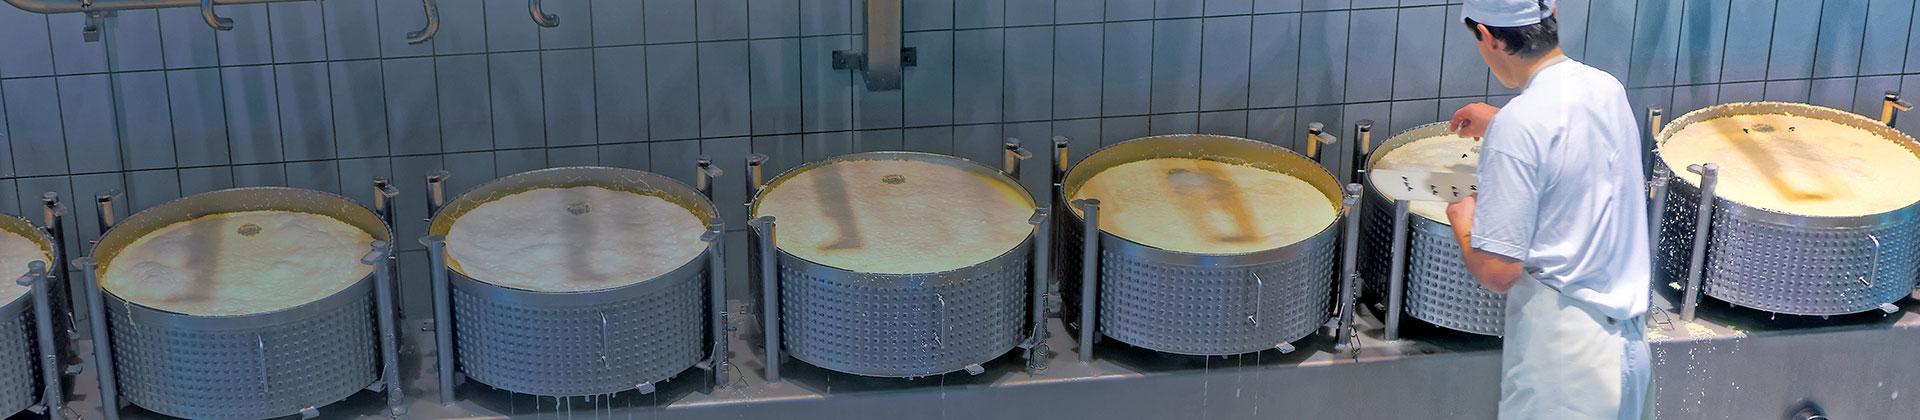 Large cooking vats filled with a liquid.